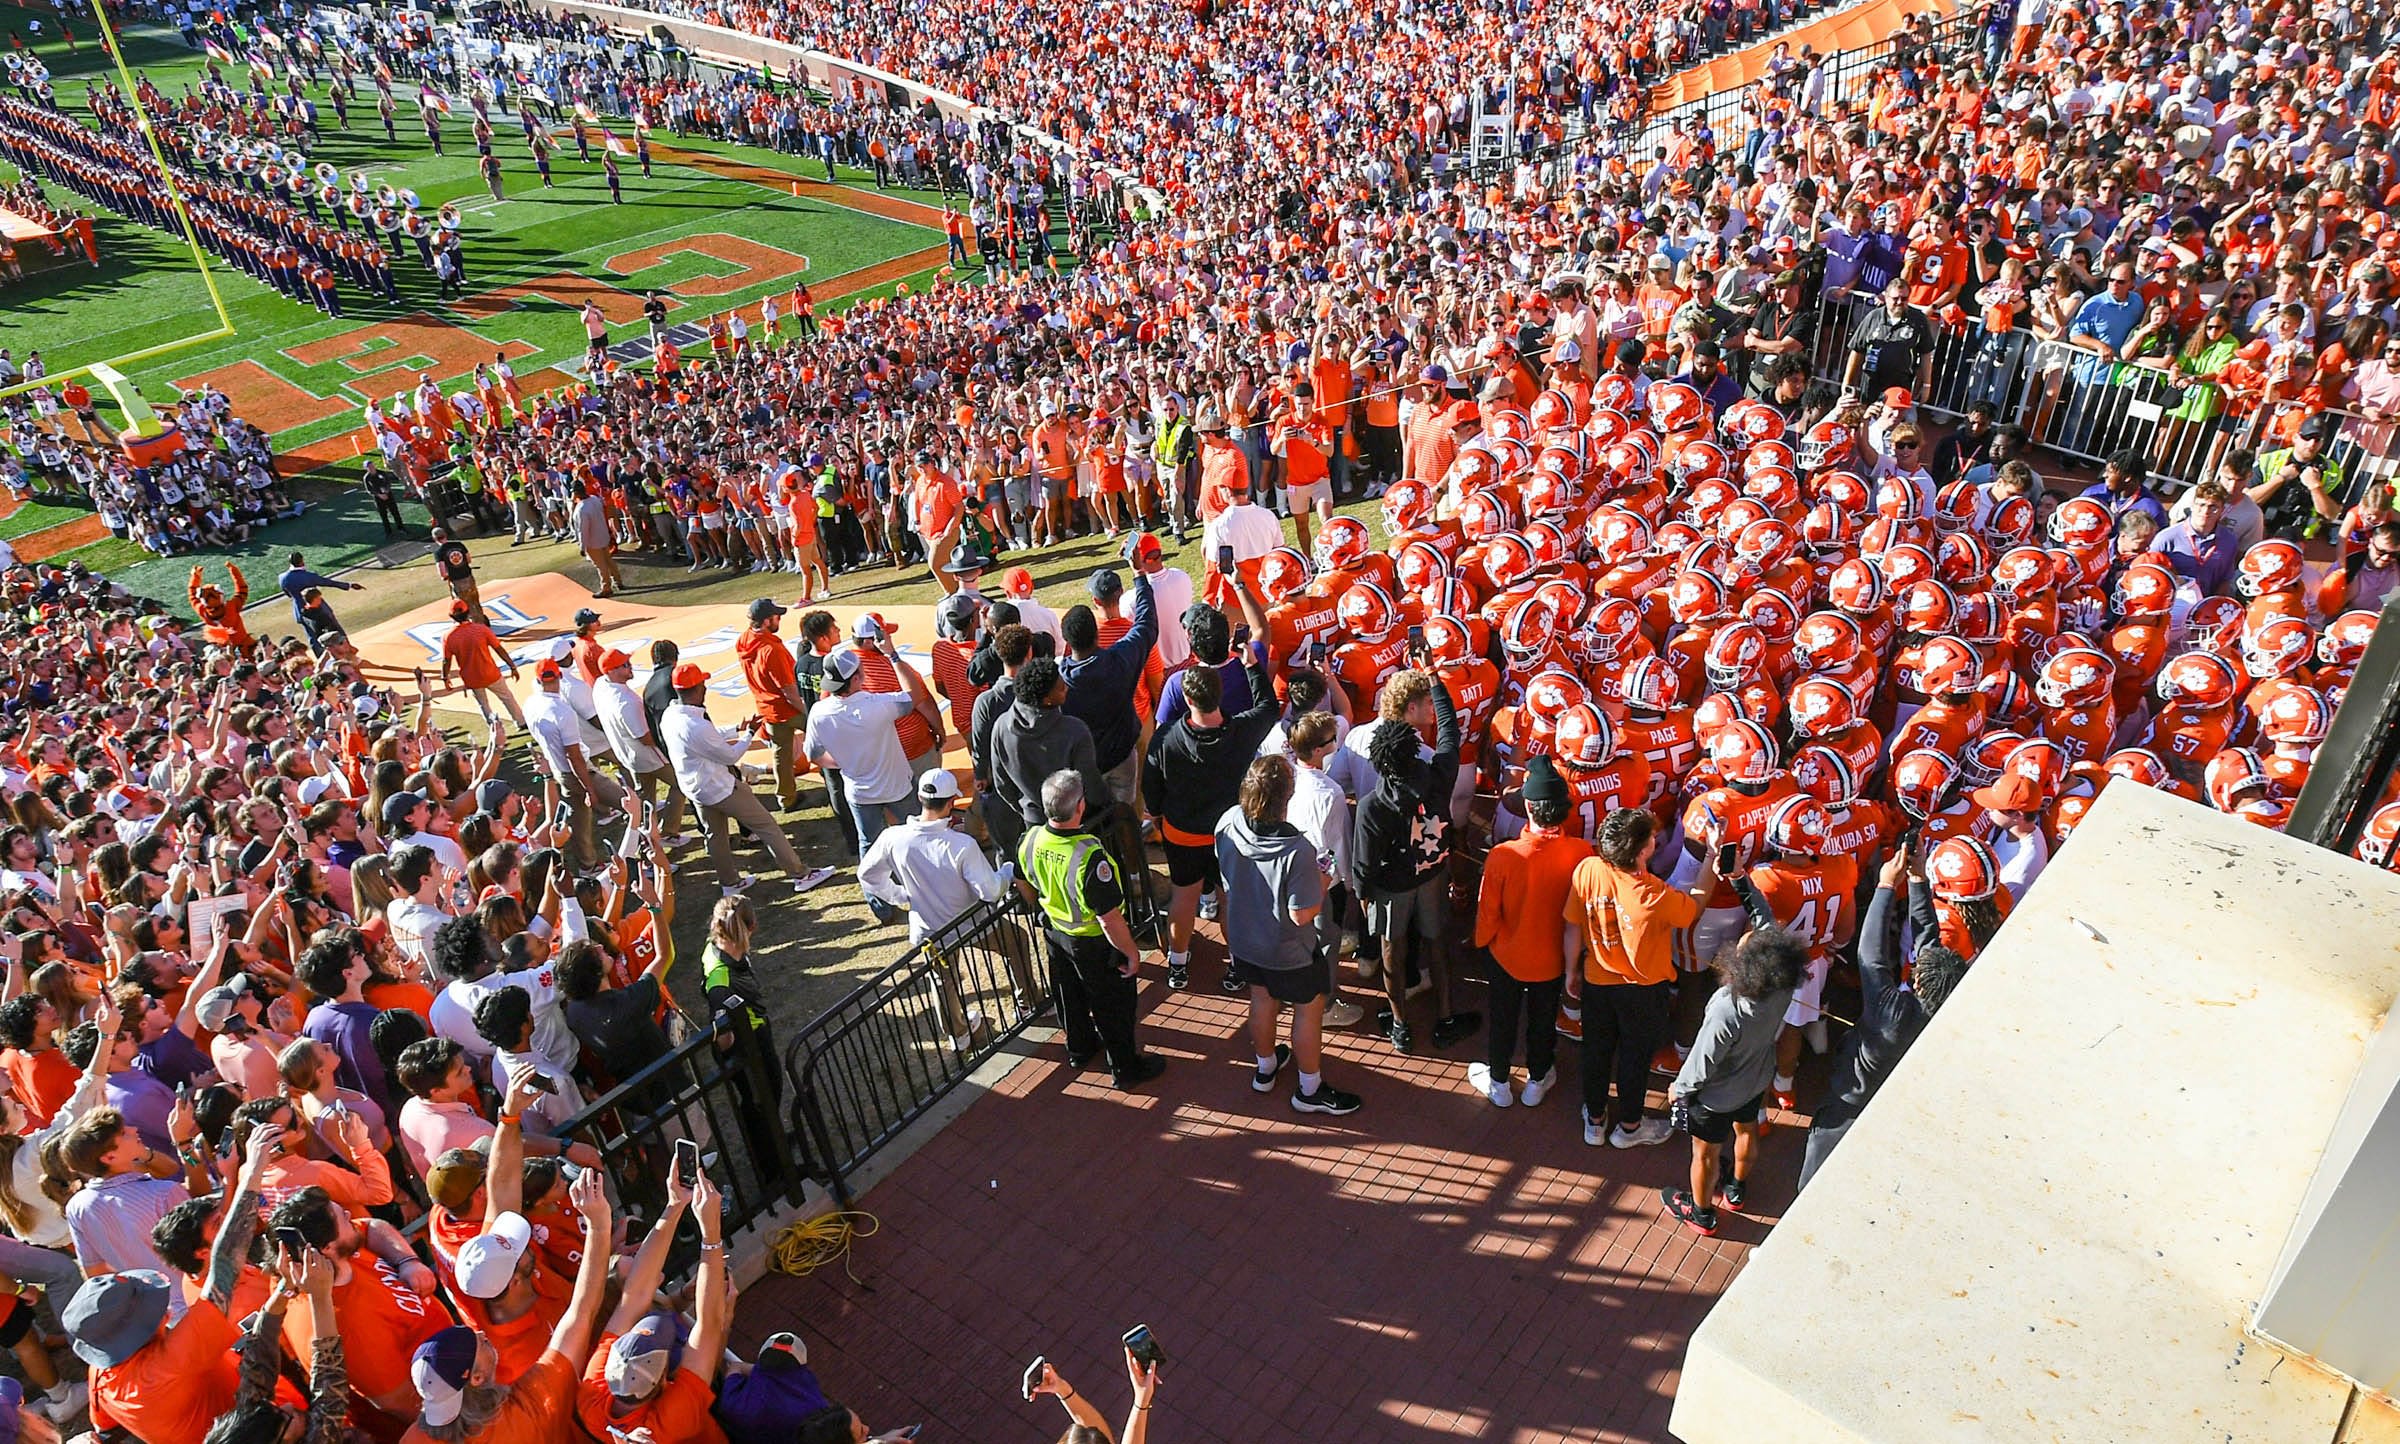 Clemson ranks as one of the Top 10 loudest college football stadiums